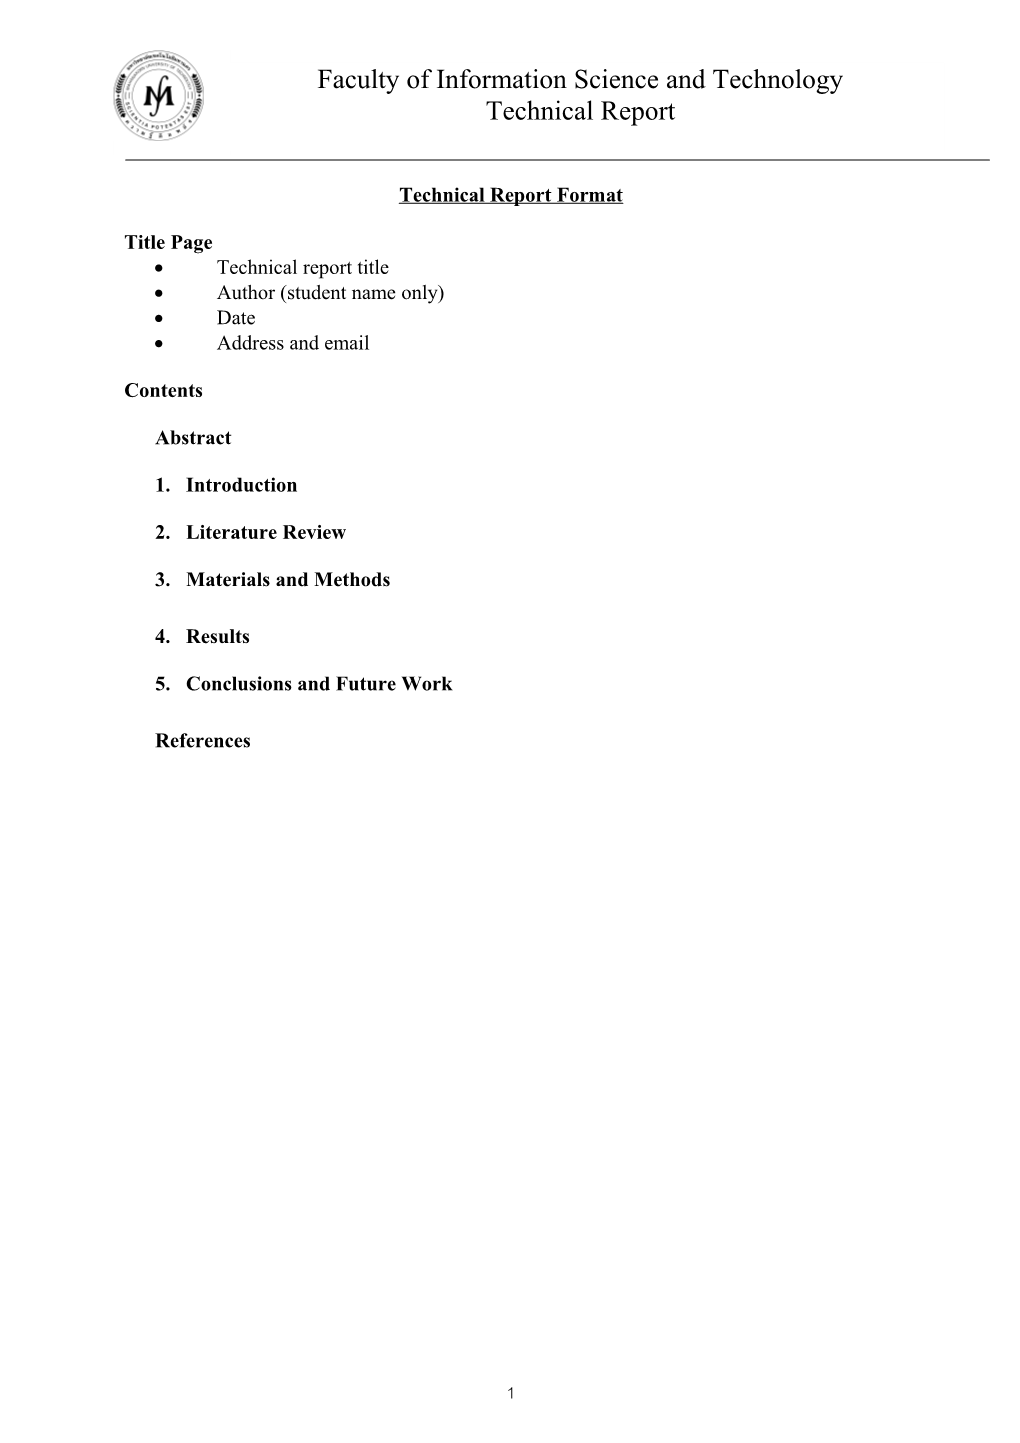 Technical Report Format